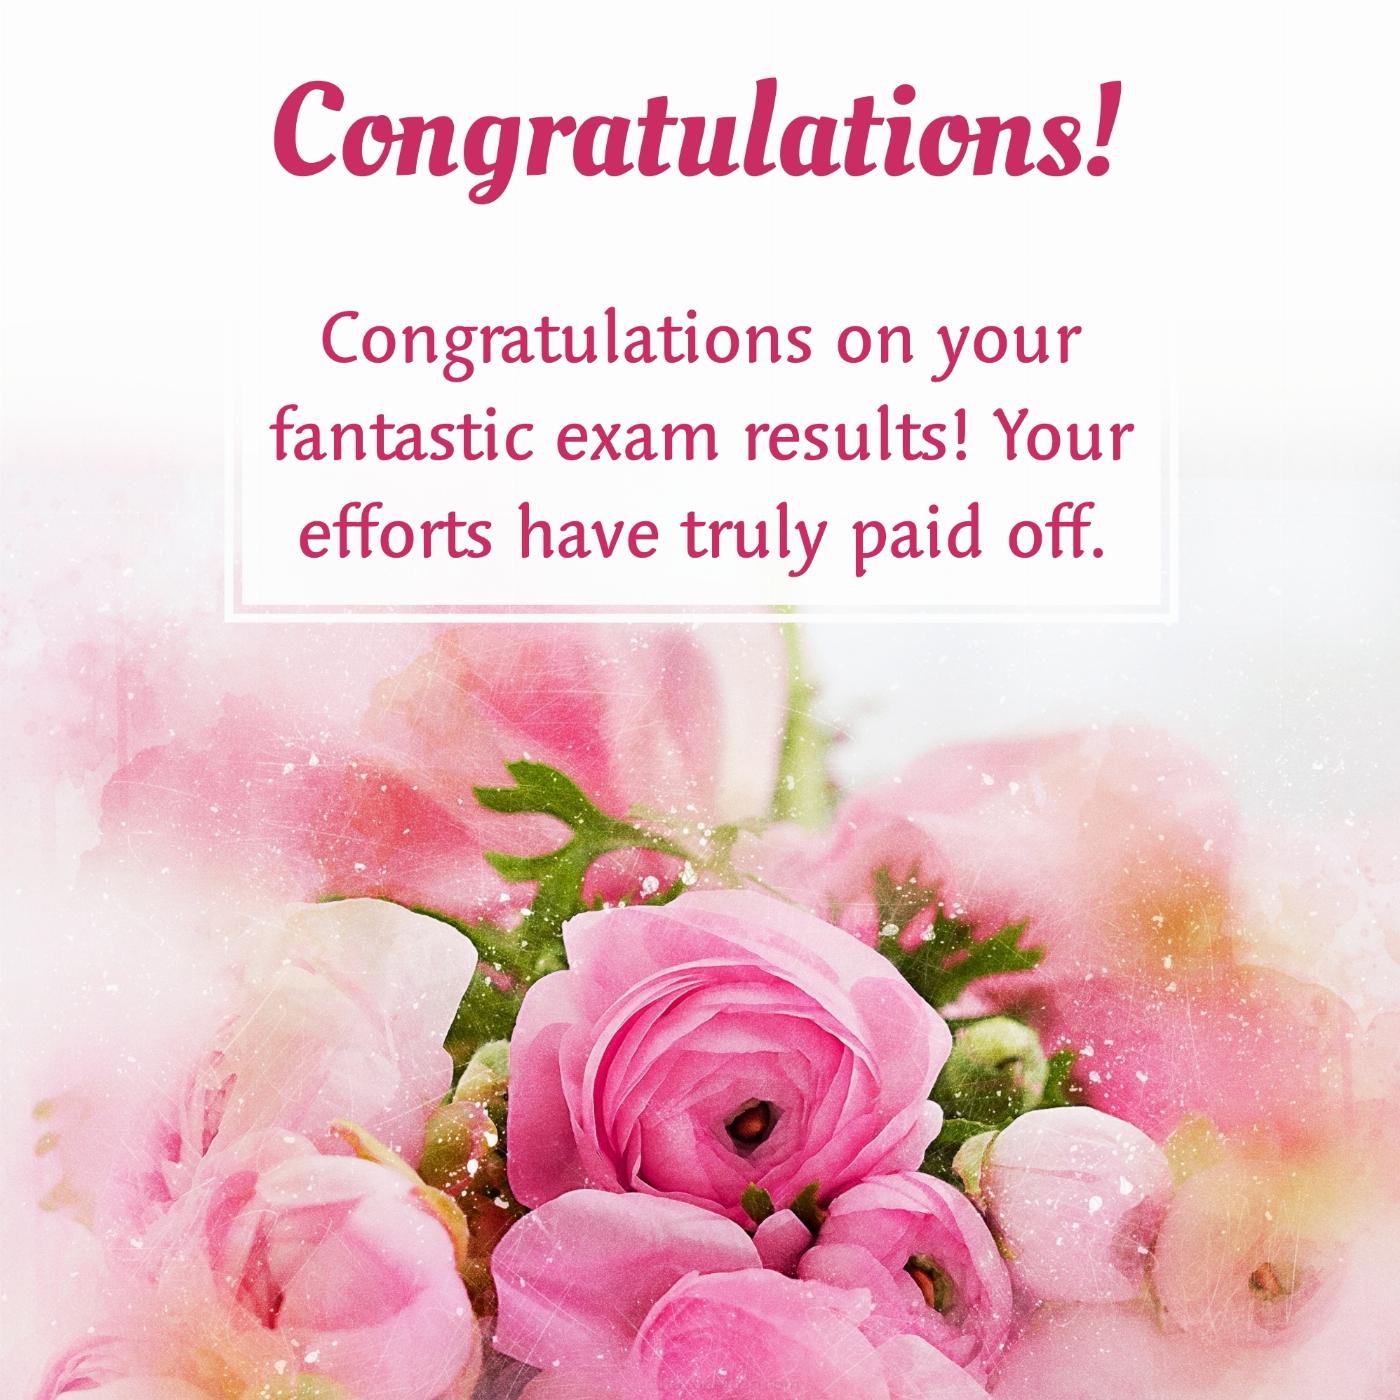 Congratulations on your fantastic exam results!